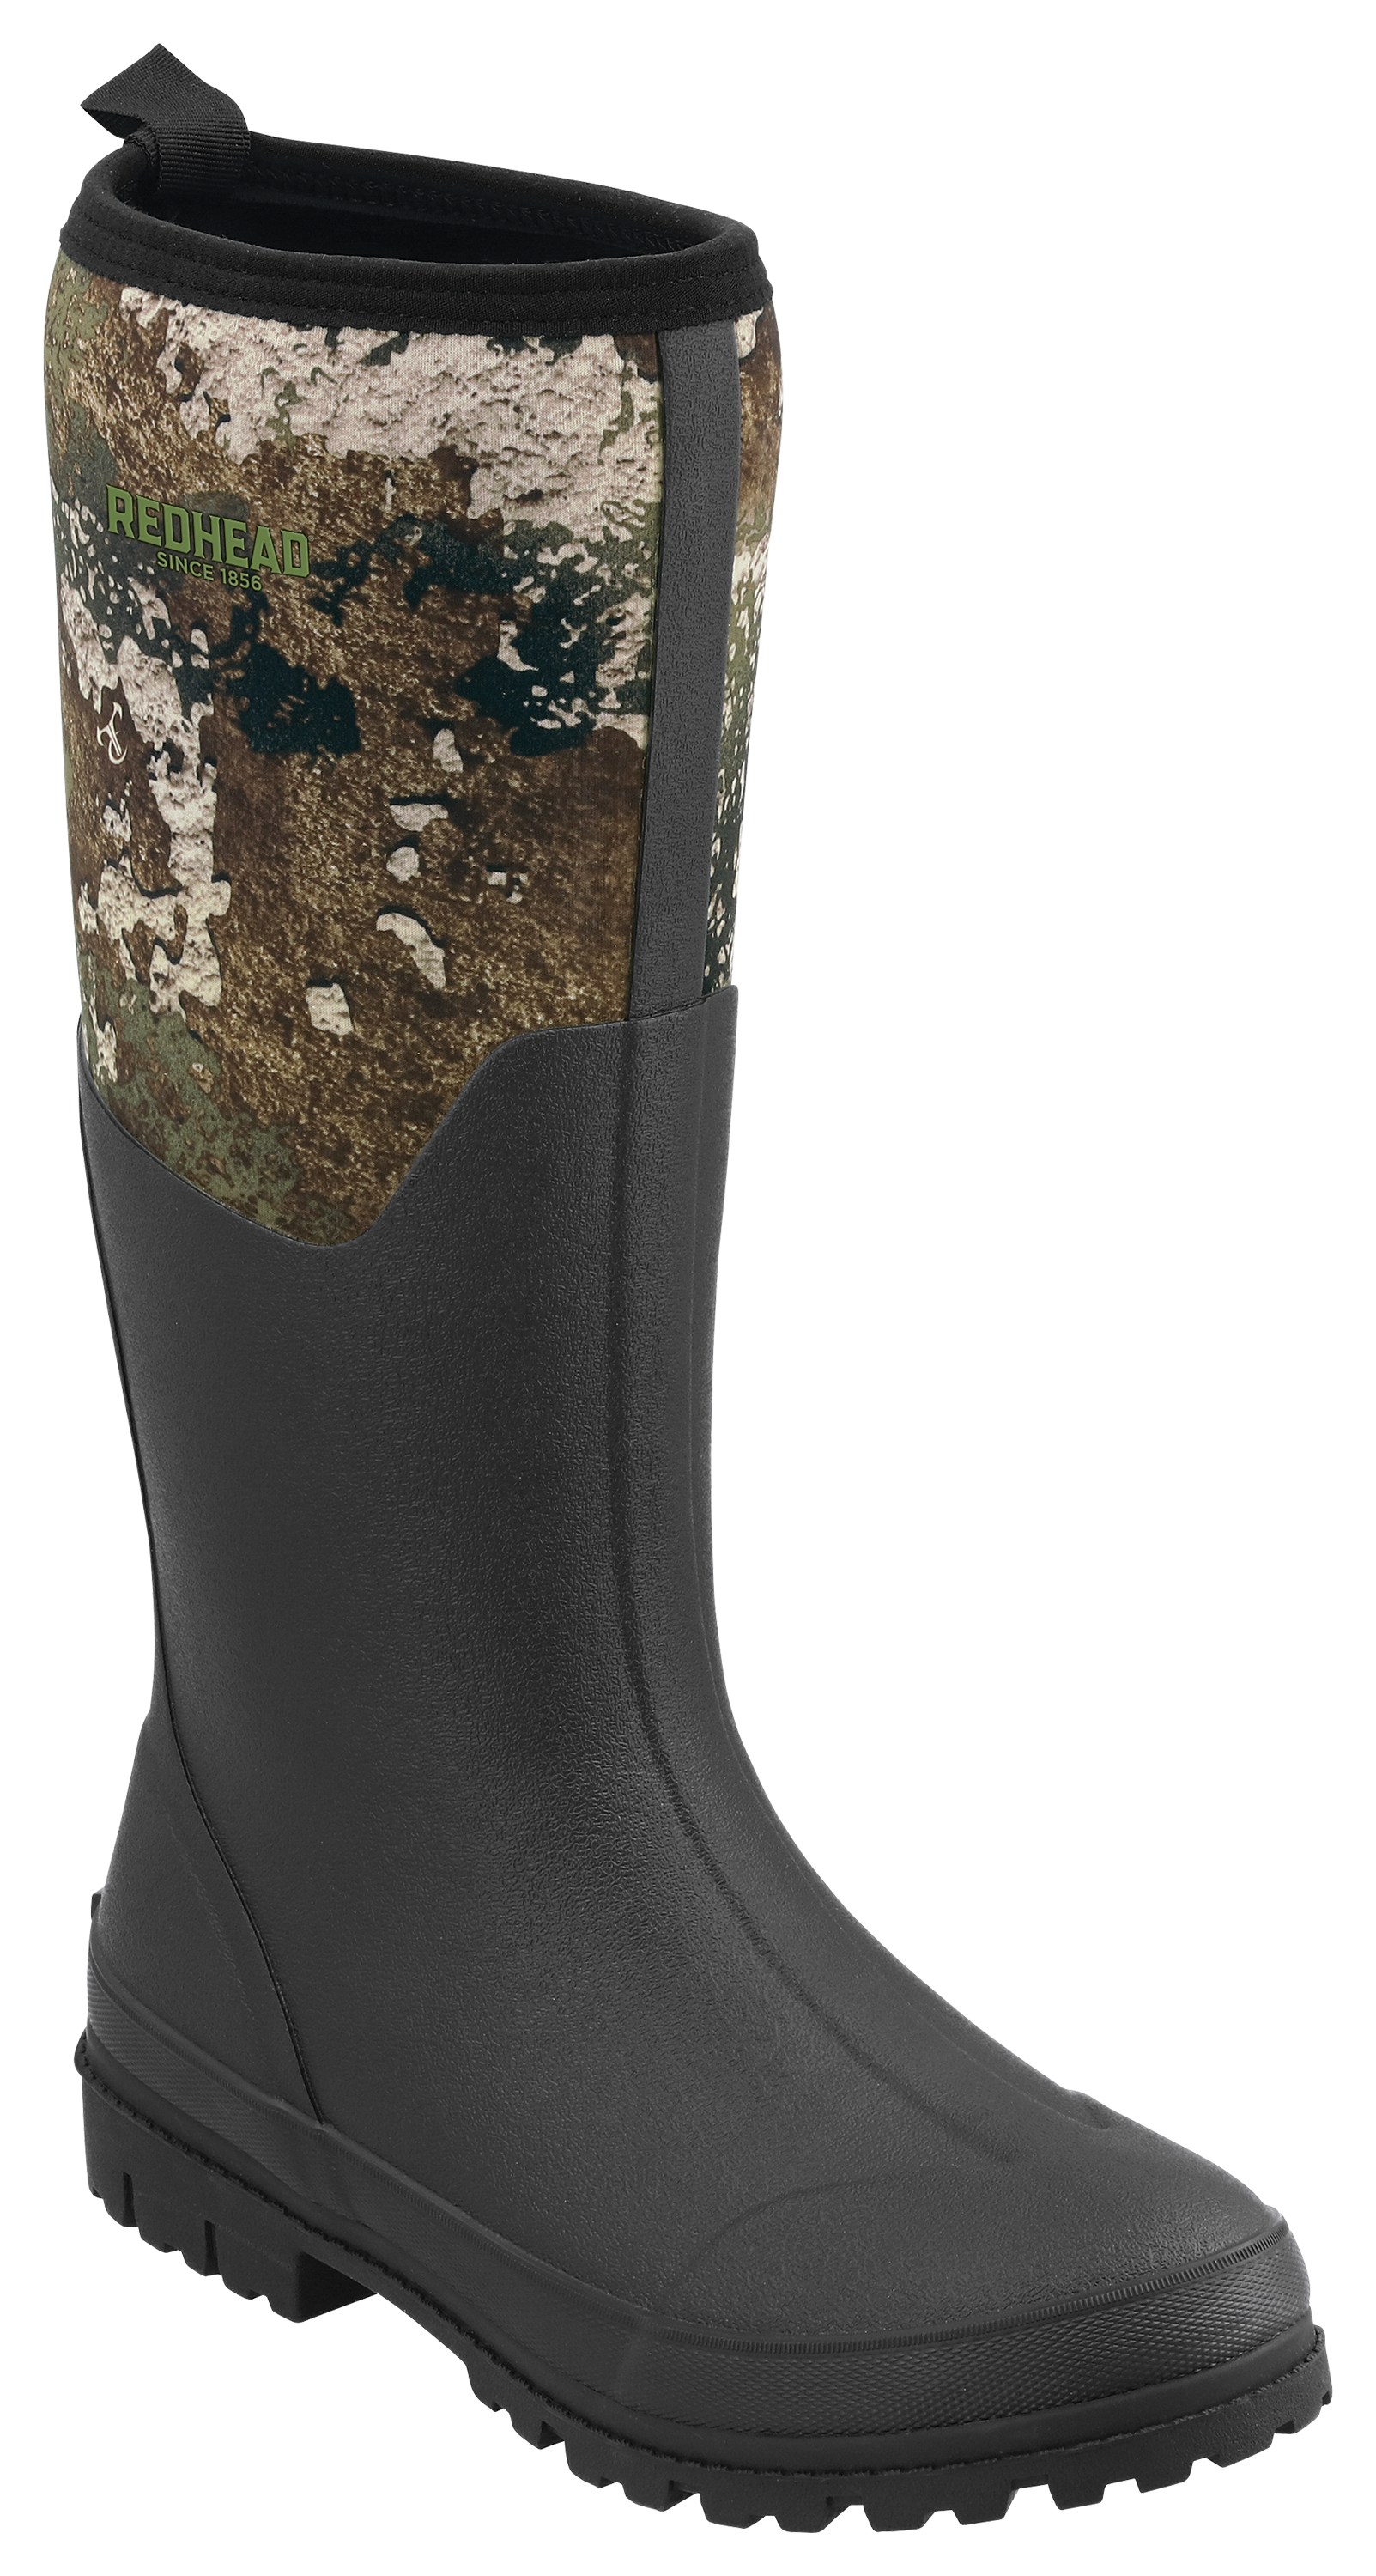 Rubber Boots for Hunting, Fishing, Gardening & More